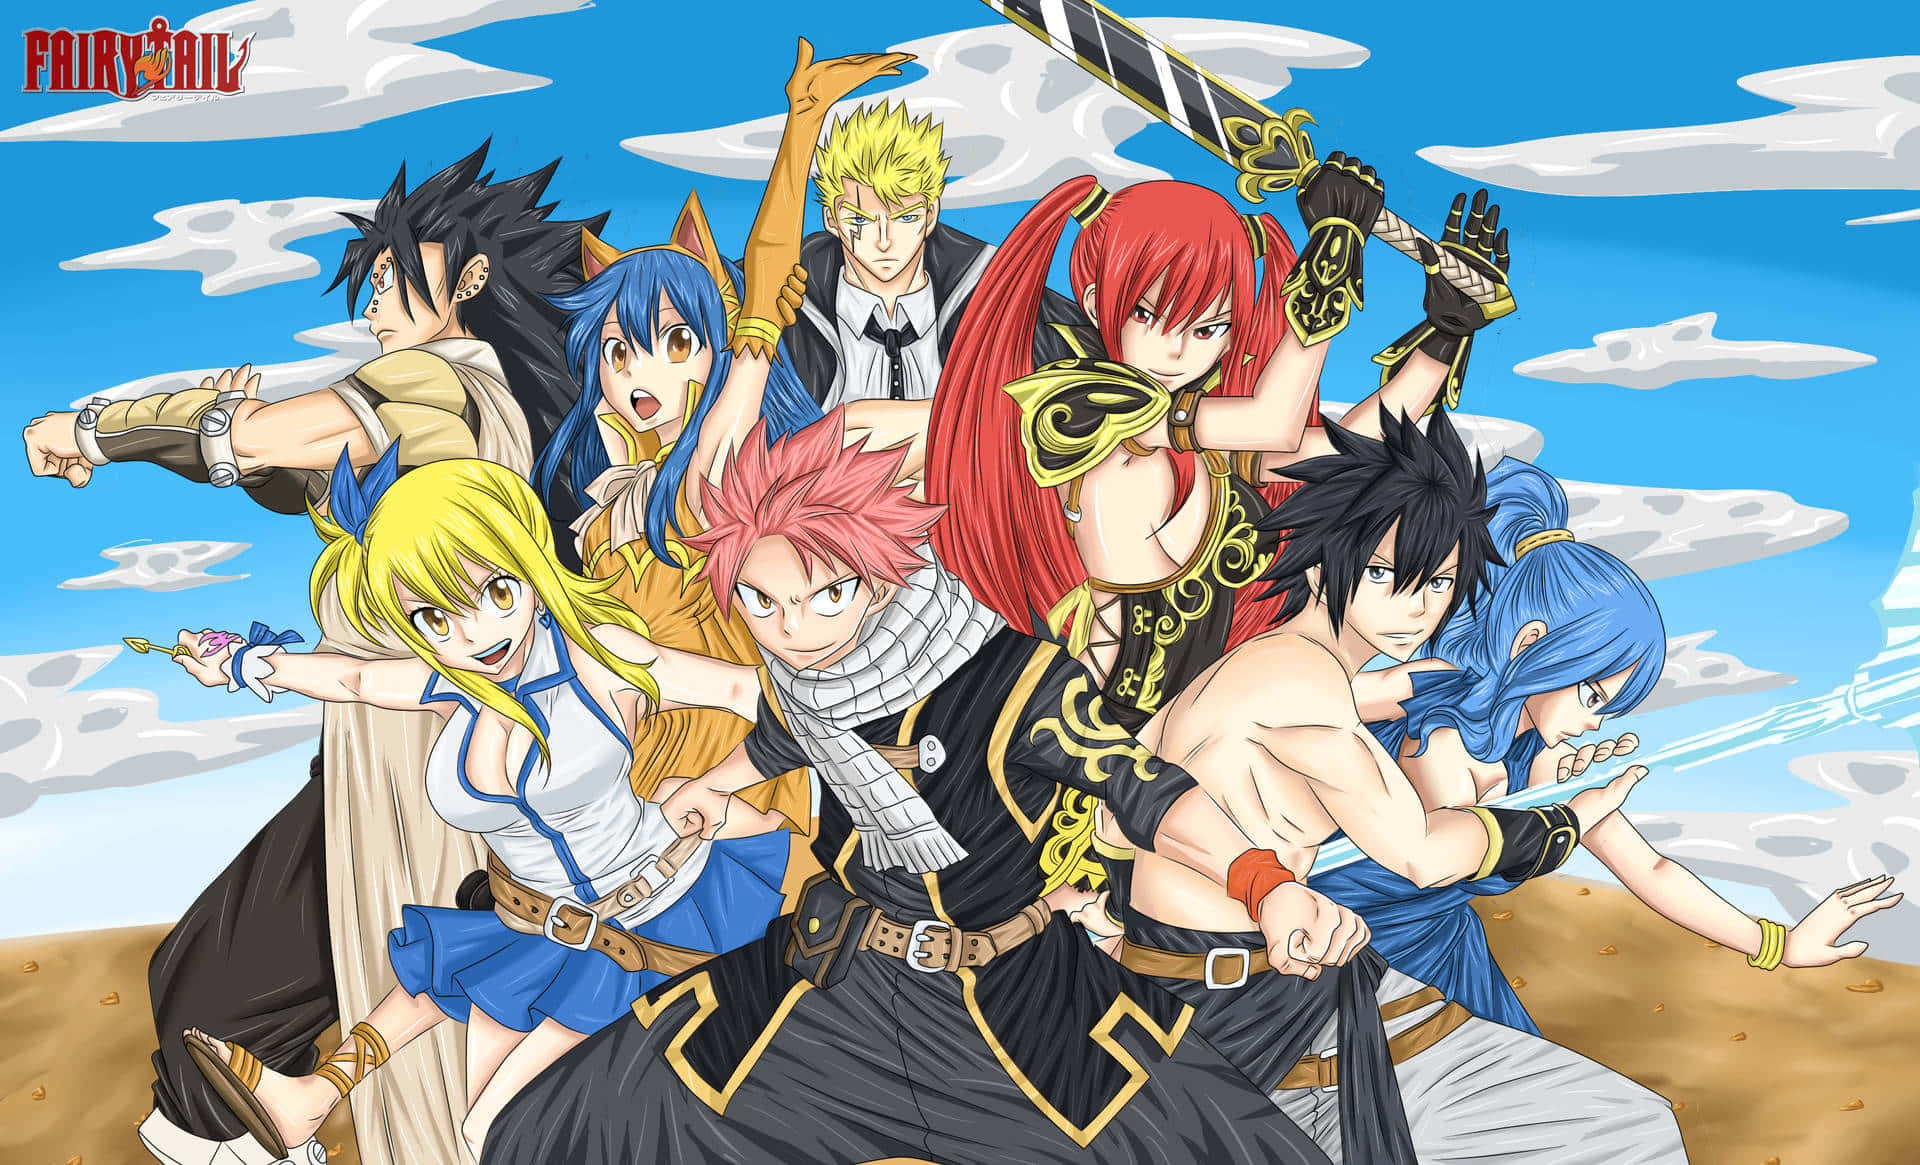 Enter the world of Fairy Tail and explore the magic it has to offer.